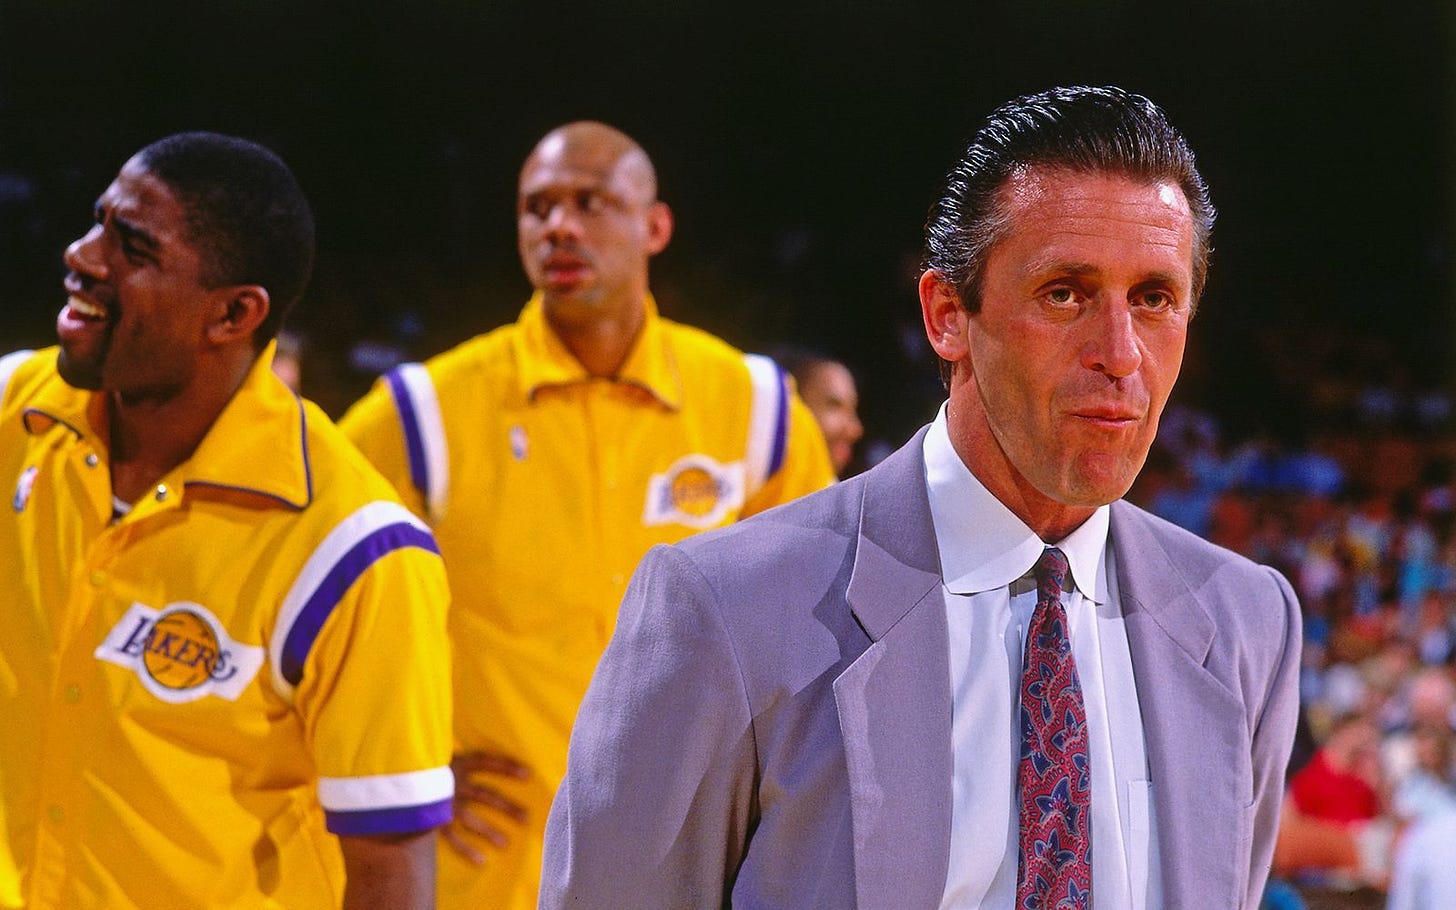 Pat Riley, the "made in Italy" style icon of the NBA Finals